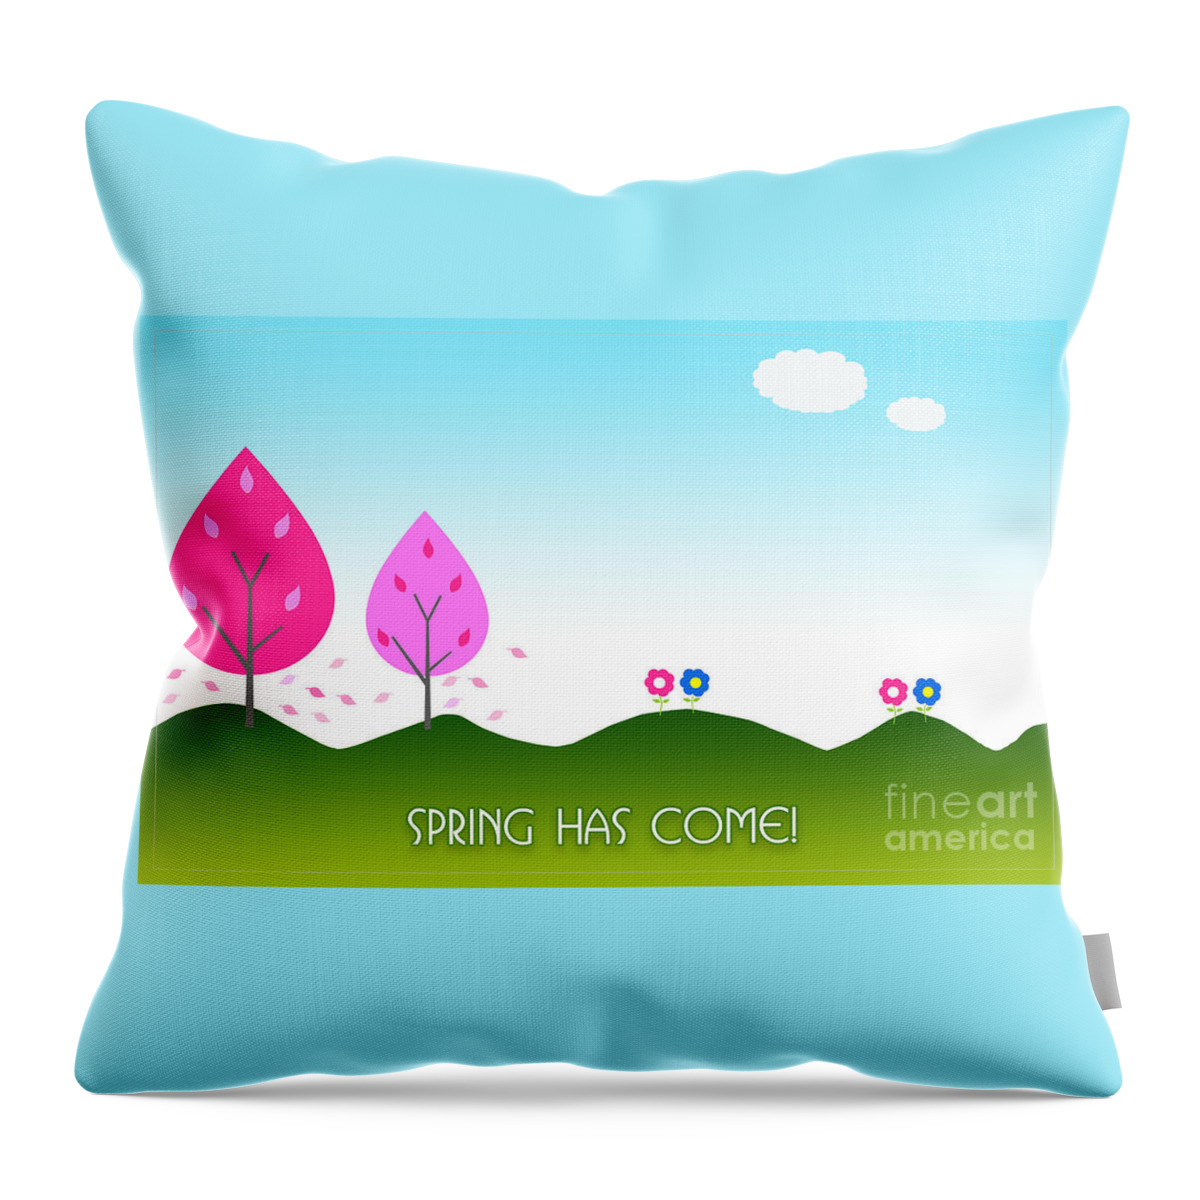 Spring Has Sprung Throw Pillow featuring the digital art Spring As Come Card by Scott Parker